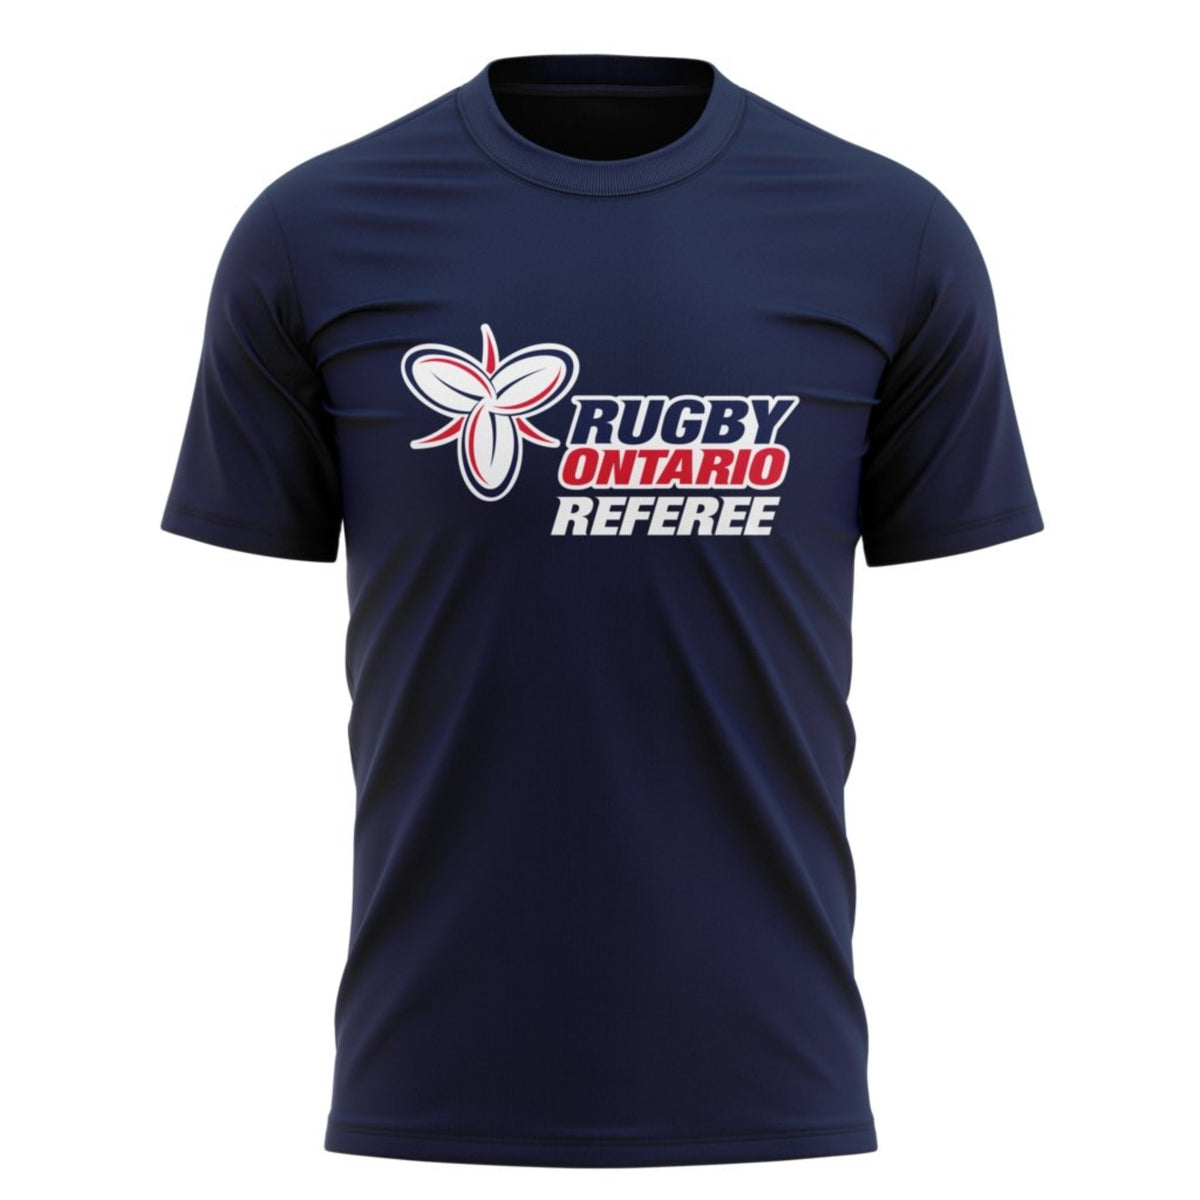 Rugby Ontario Referees Logo Tee - www.therugbyshop.com www.therugbyshop.com UNISEX / NAVY / S XIX Brands TEES Rugby Ontario Referees Logo Tee